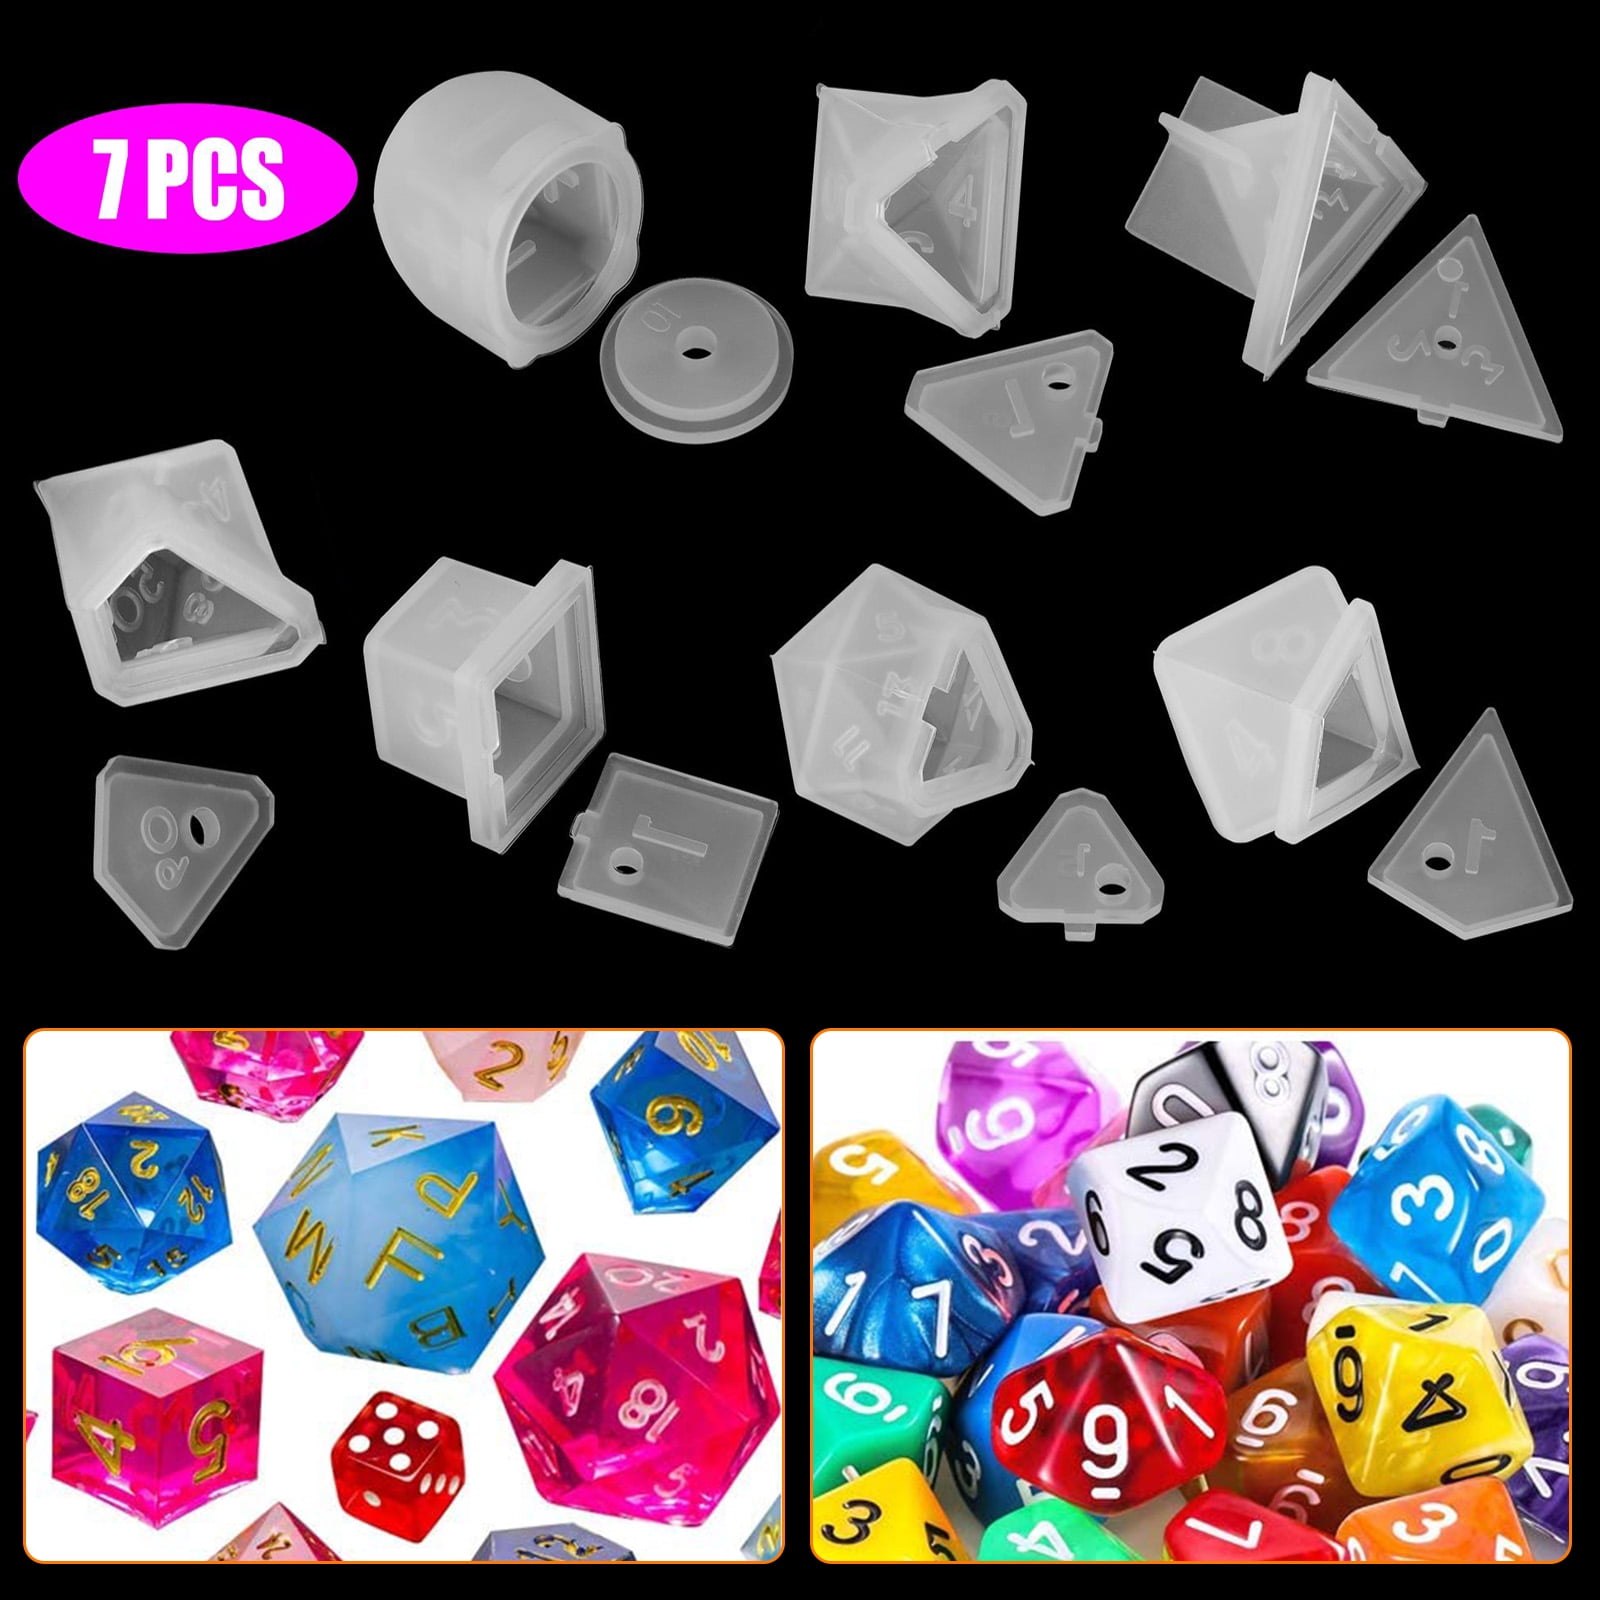 7 Shapes Dice Molds for Resin, EEEkit Resin Dice Mold Set with Letter  Number, Polyhedral Silicone Dice Molds for Resin Casting, 3D Silicone Mold  Kit